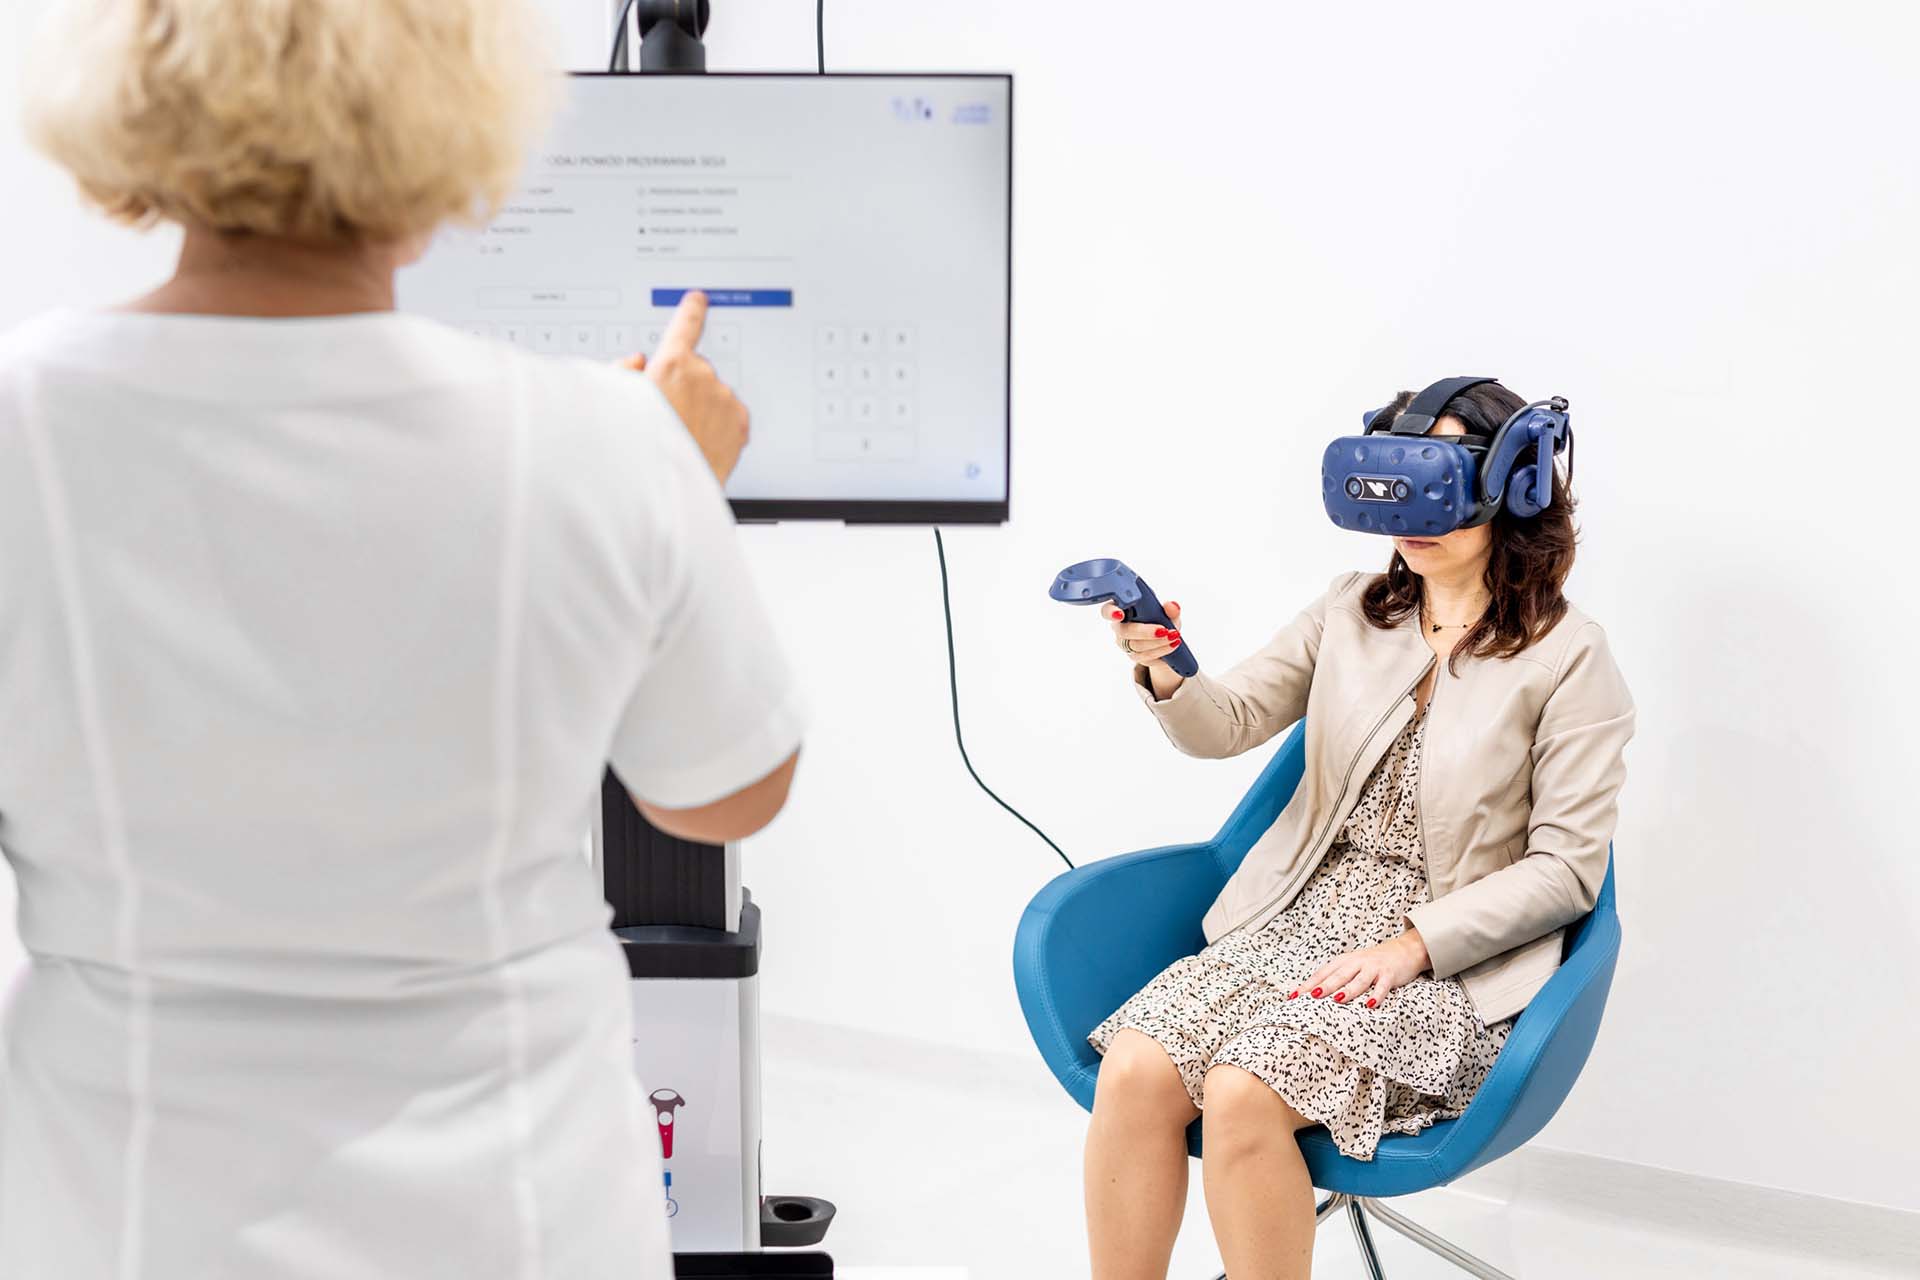 VR TierOne as support in a clinic treating the effects of COVID-19